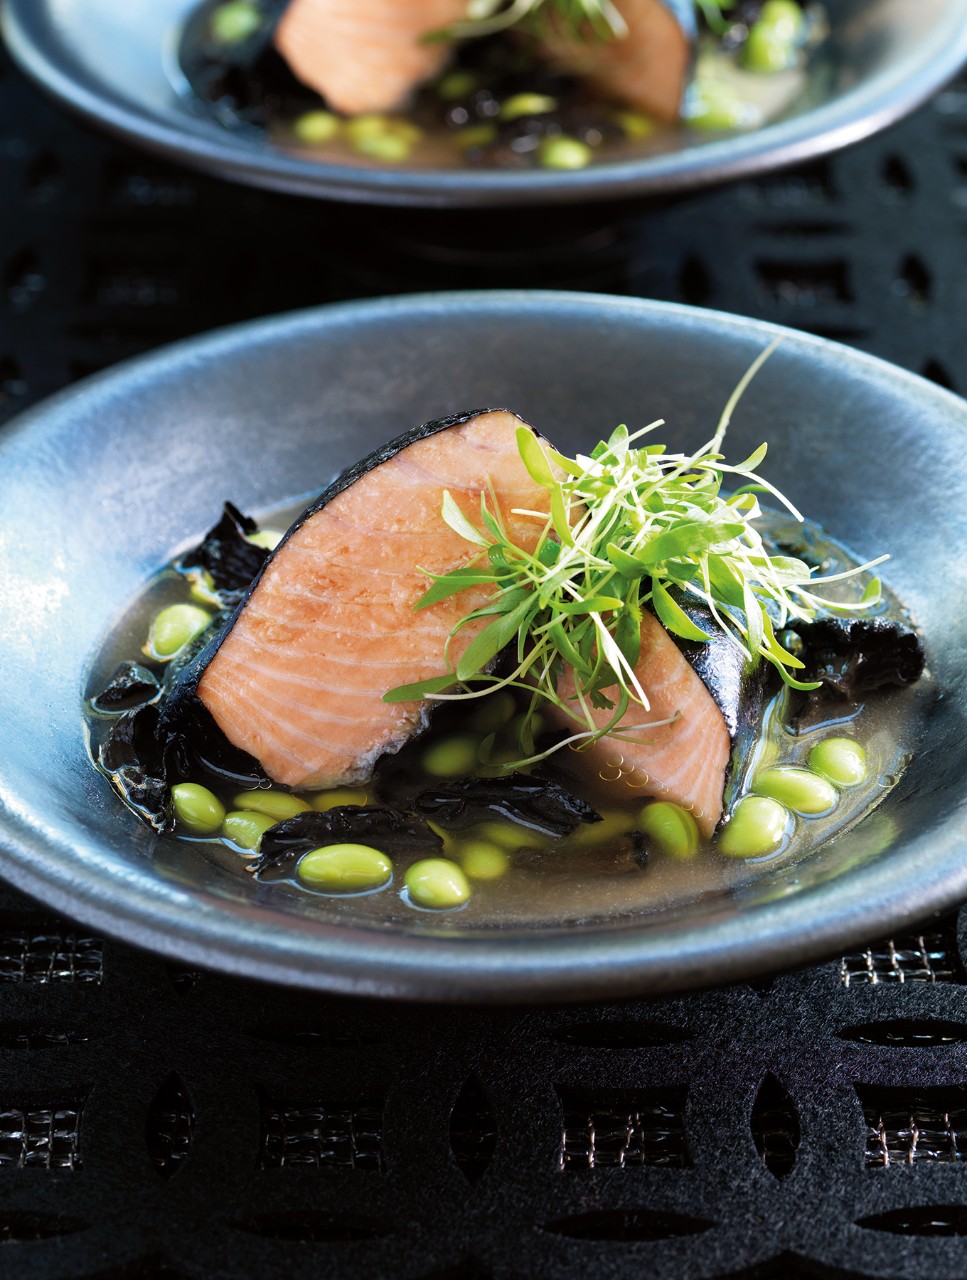 Nori-wrapped Salmon with Black Trumpet Mushrooms & Soy Beans in Miso Broth